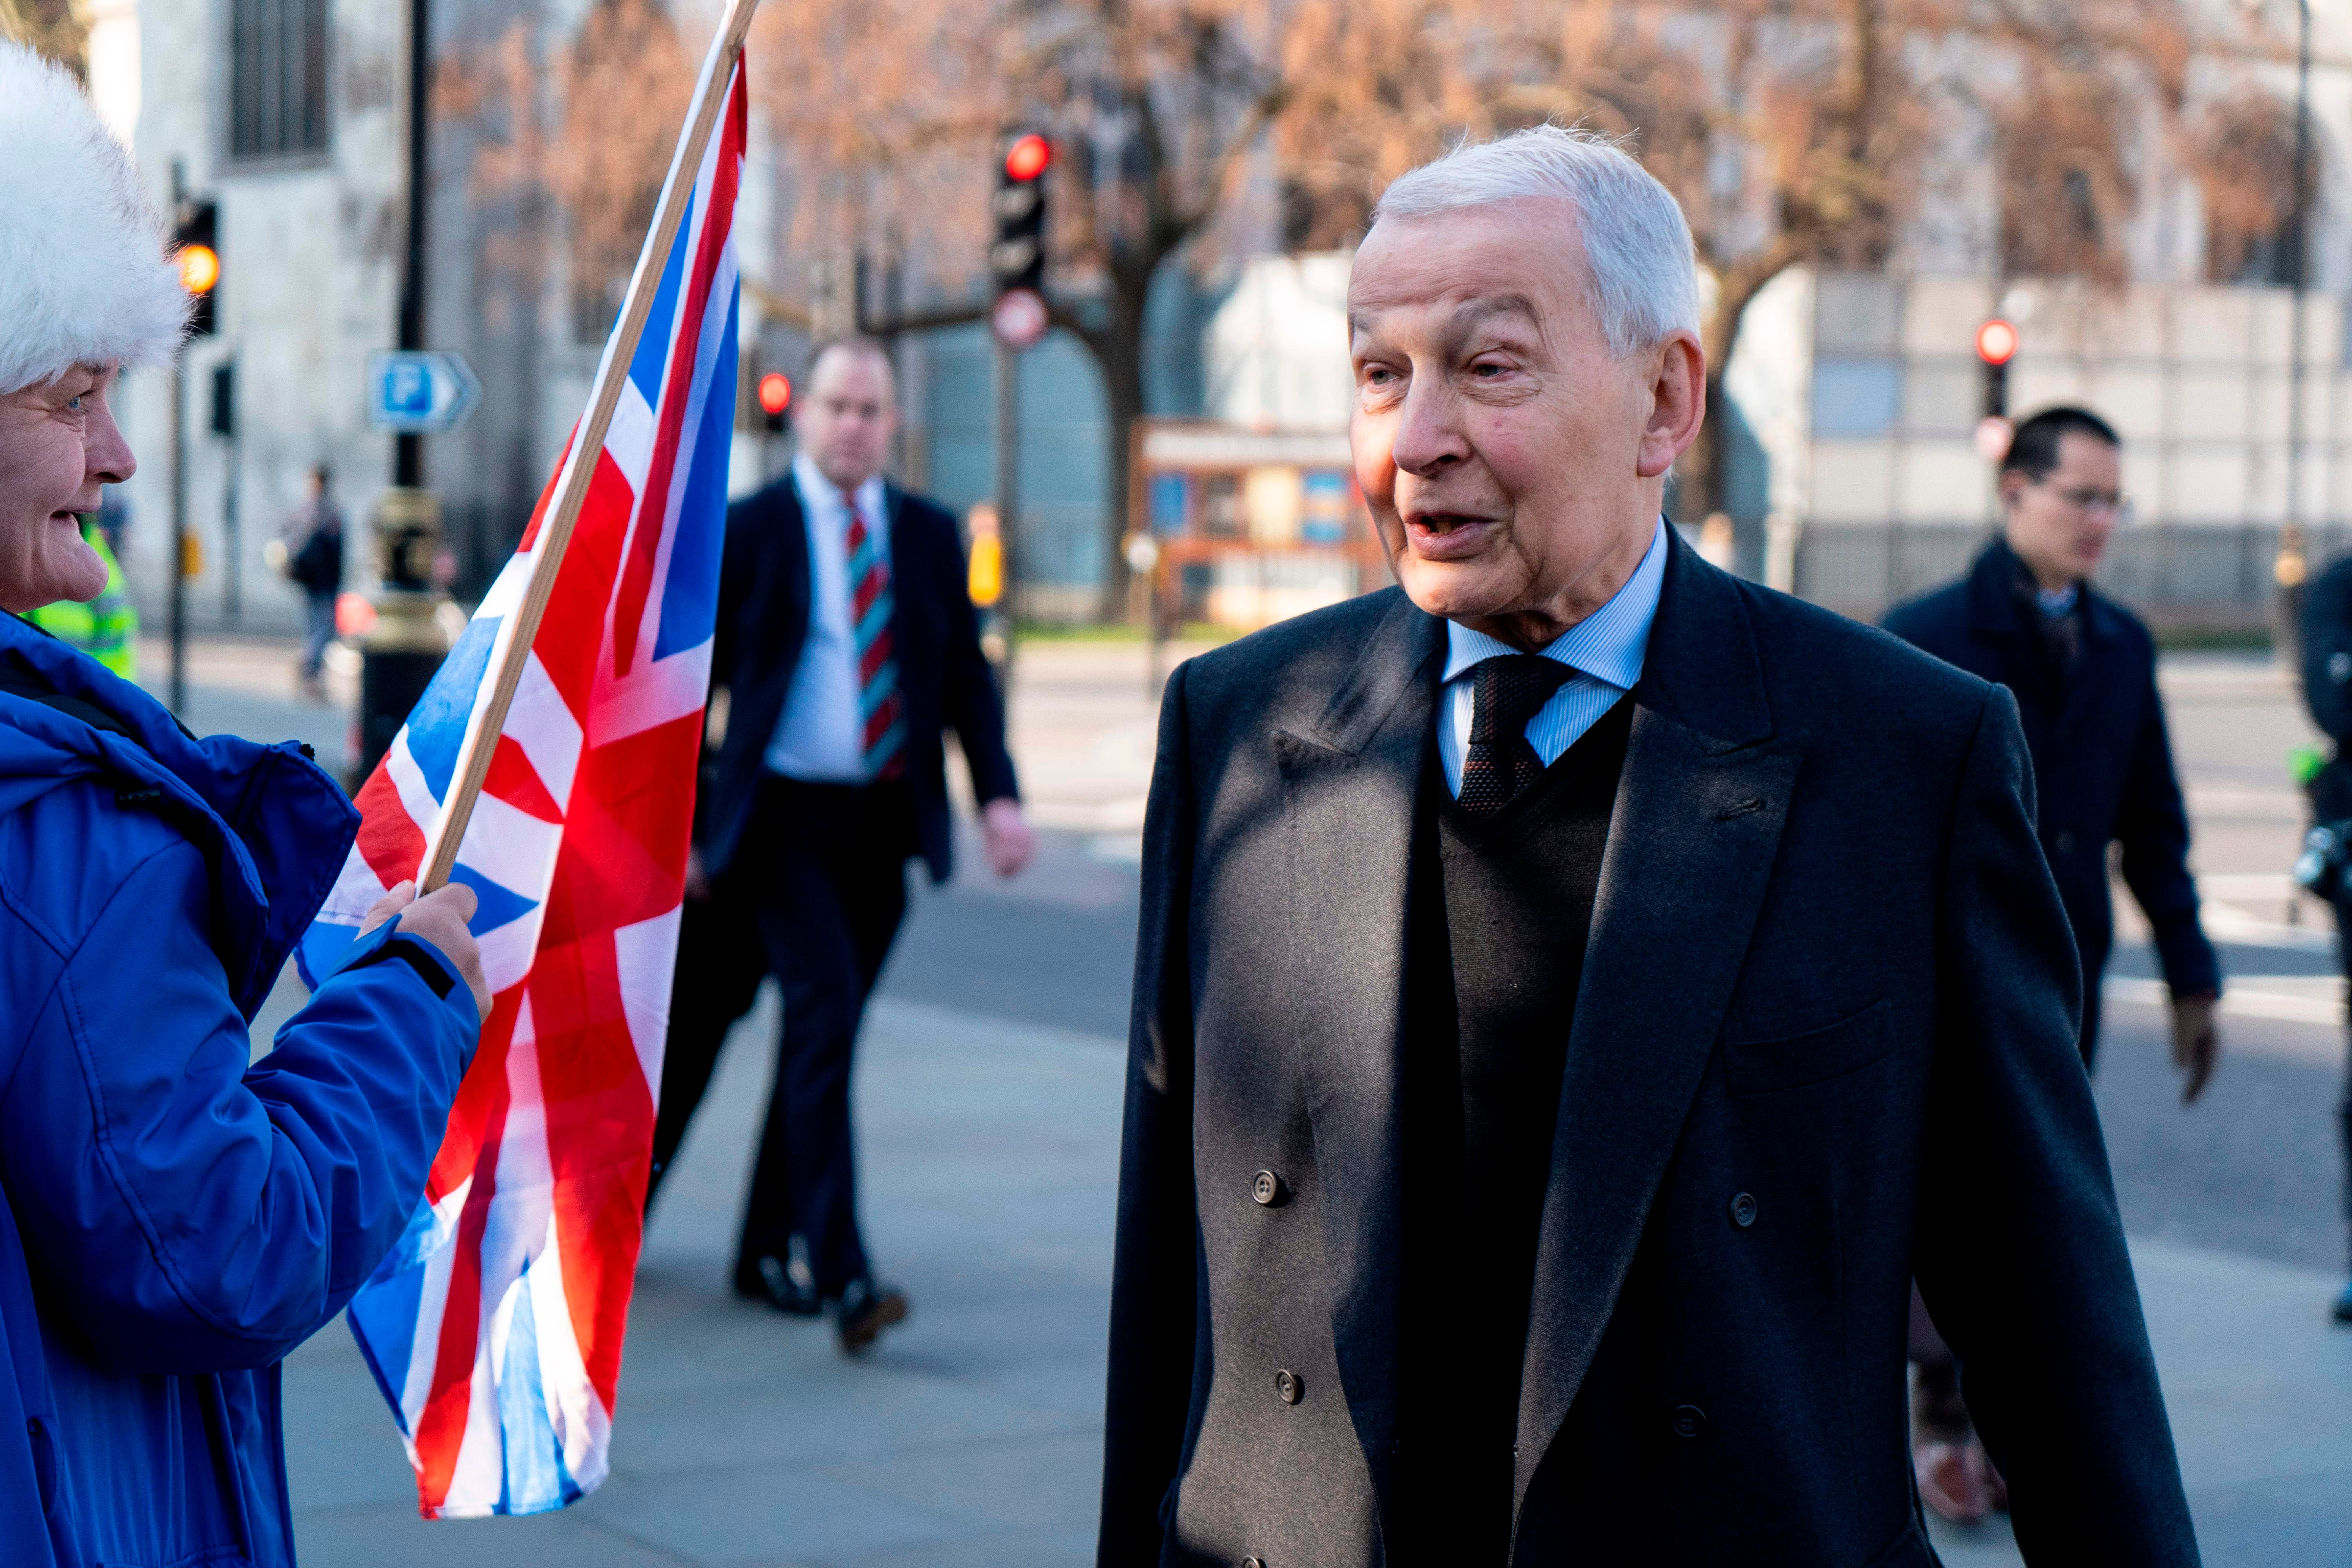 Former Labour MP Frank Field said he had changed his mind on assisted dying laws